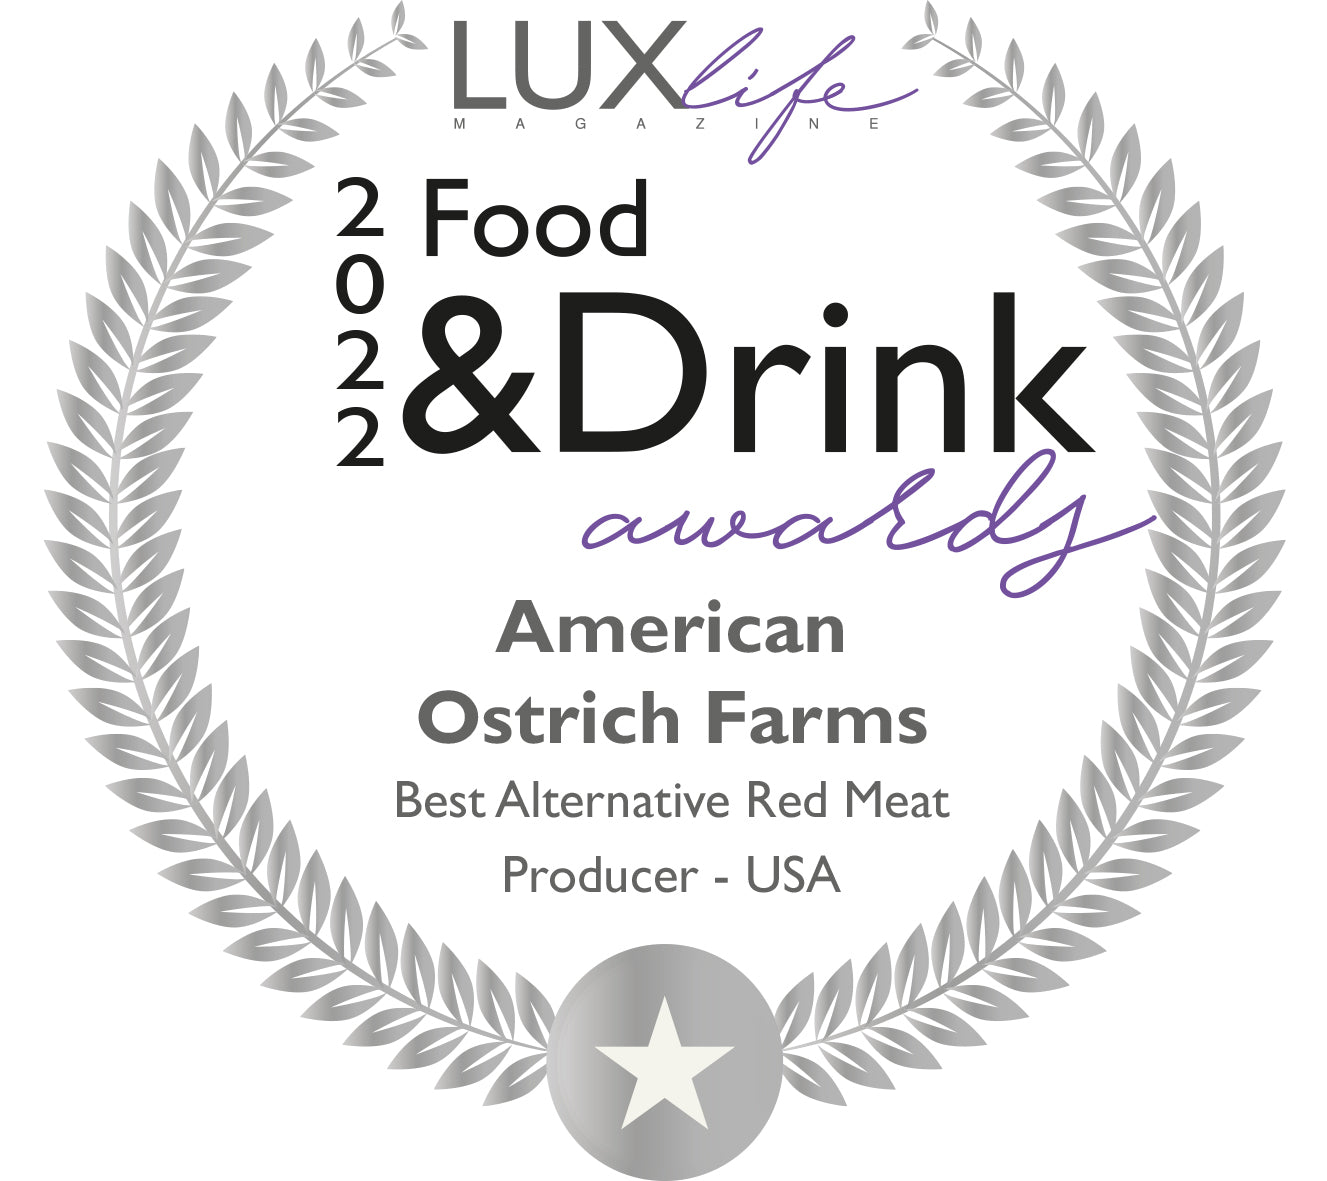 LUXLife Magazine recognizes sustainably raised ostrich meat from Idaho producer as a gourmet option with unique health benefits and less environmental impact.